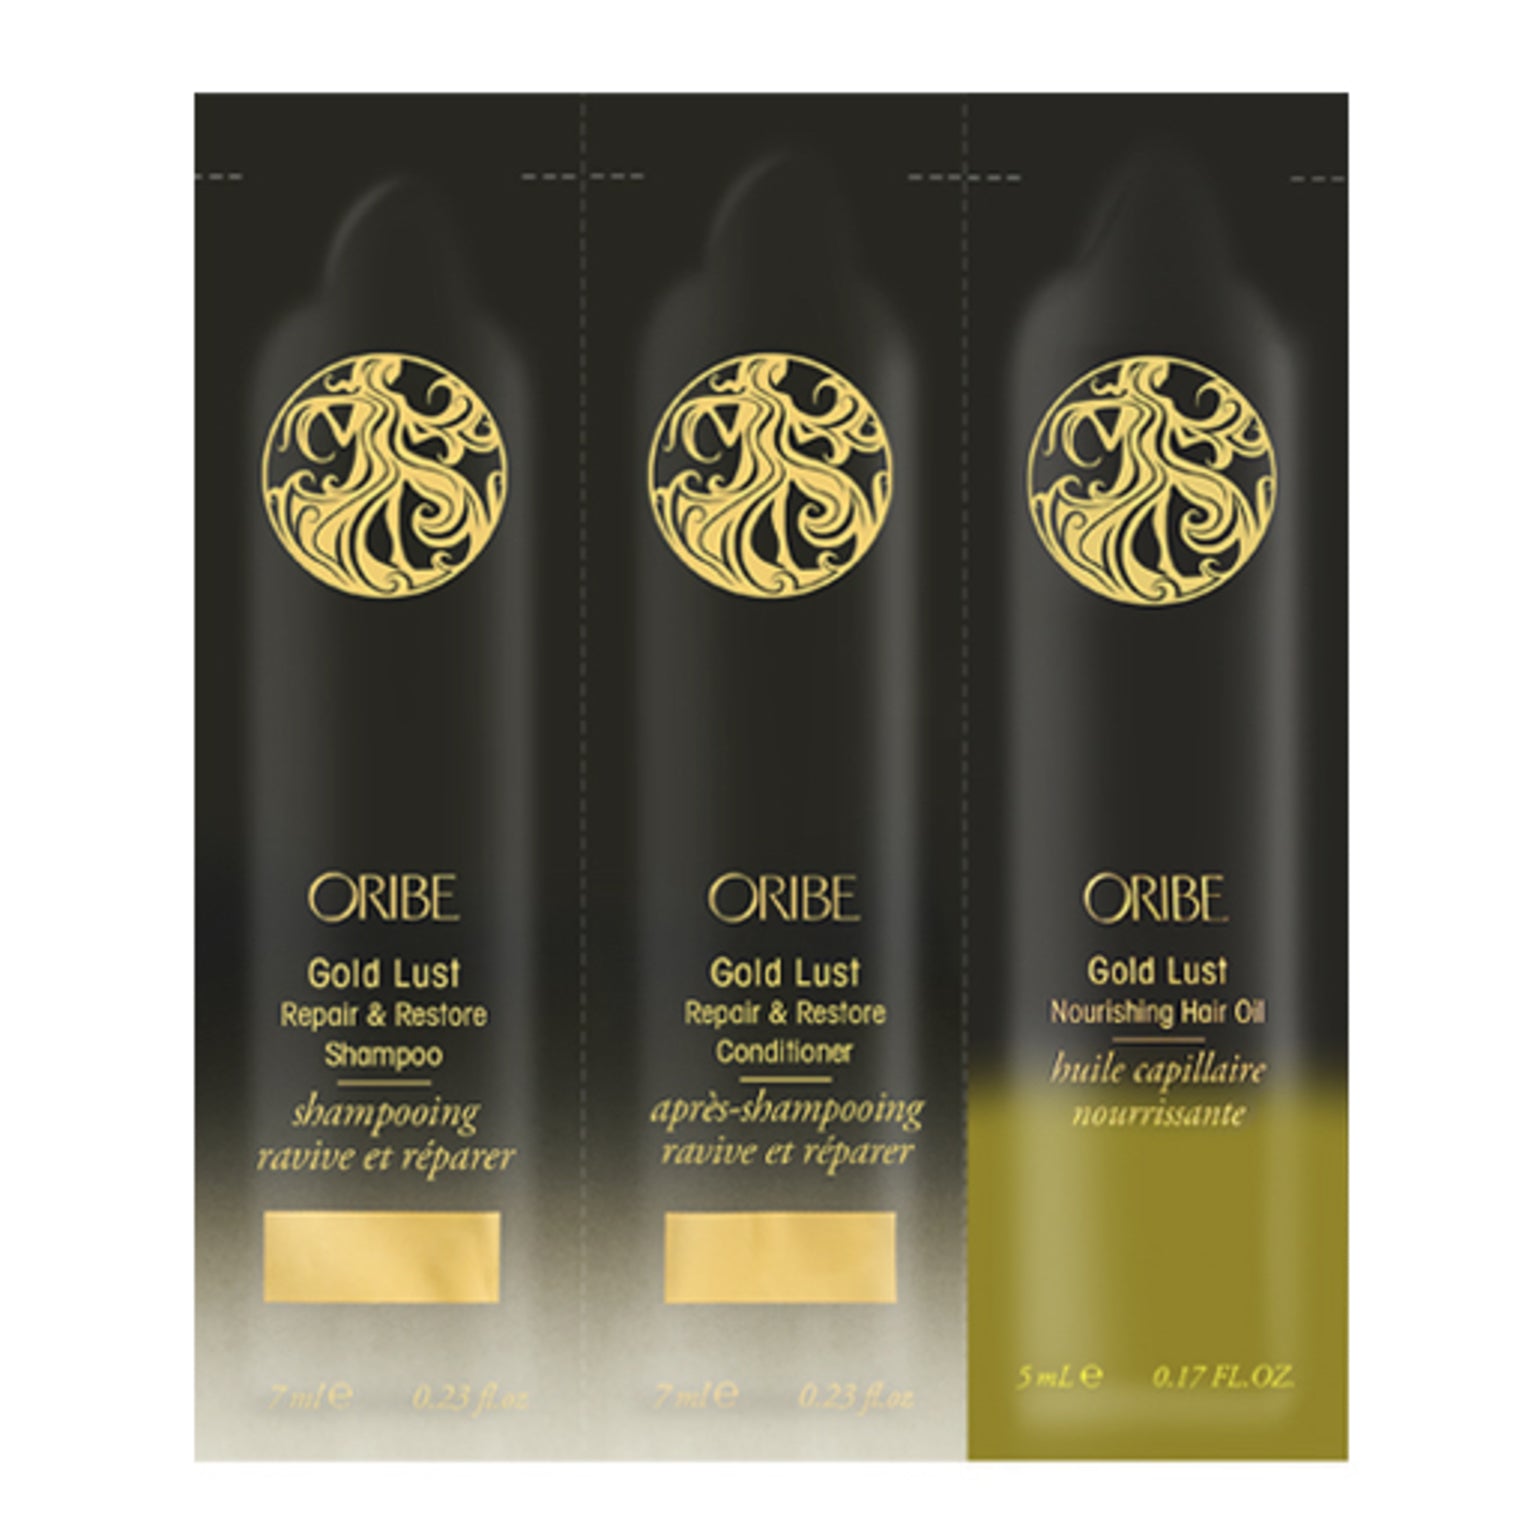 Gold Lust Shampoo, Conditioner and Oil Sample